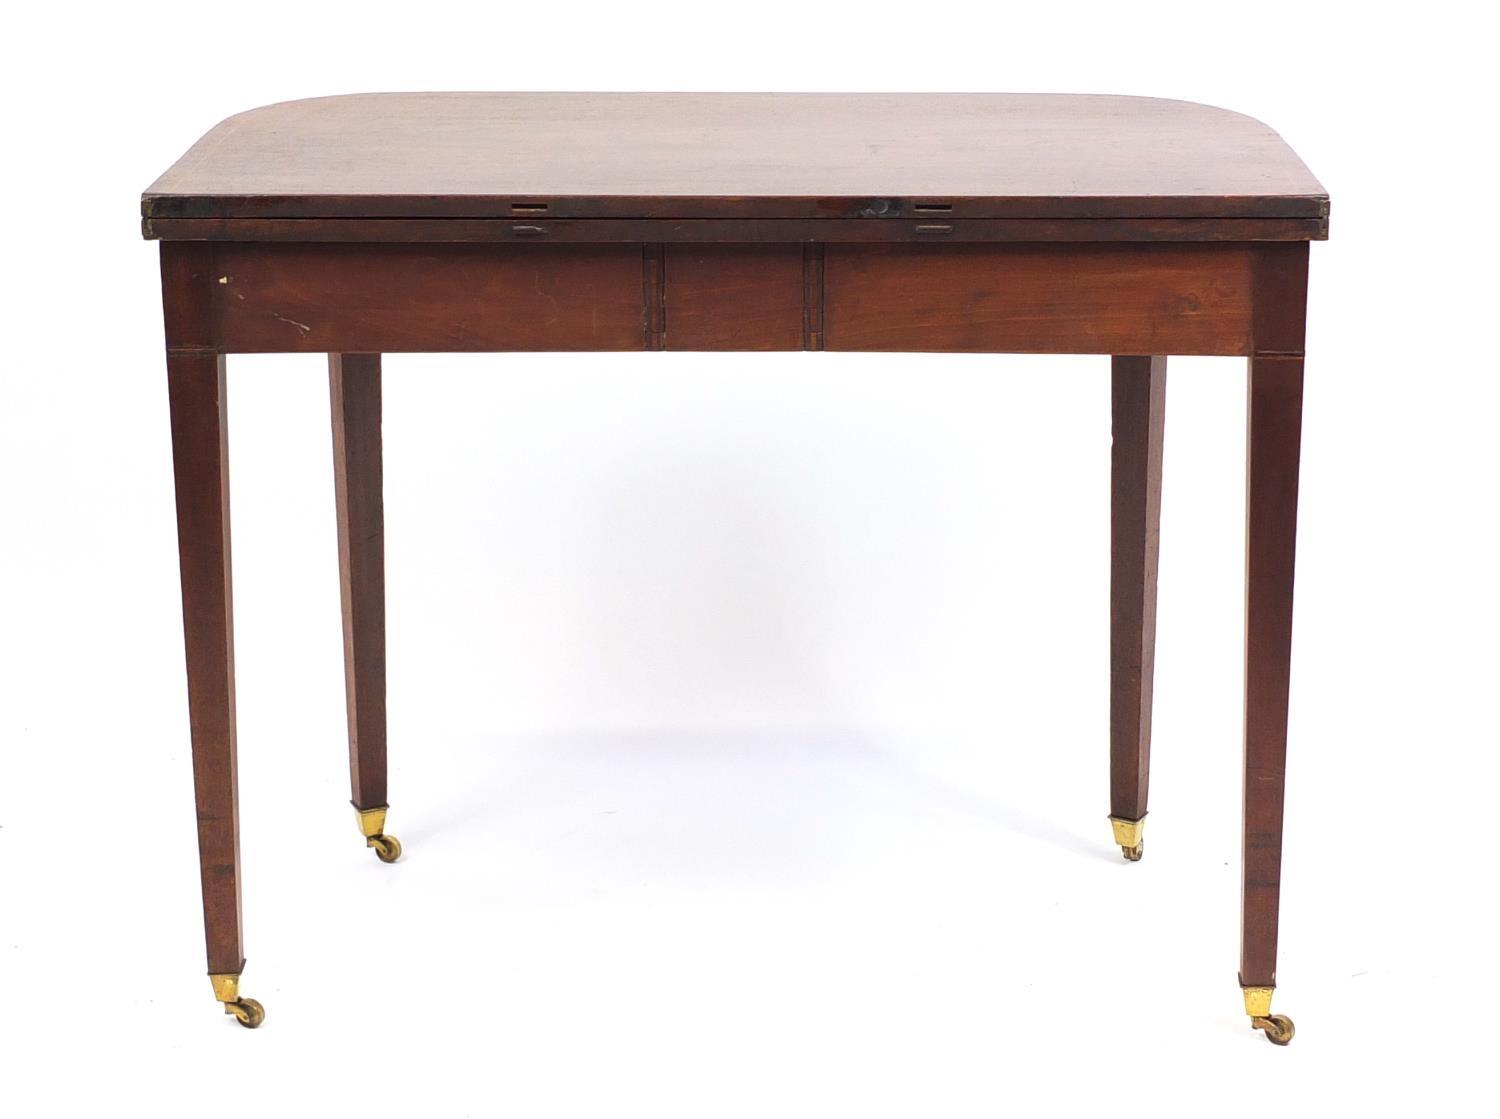 Edwardian inlaid mahogany fold over tea table, raised on tapering legs, 72cm H x 91cm W x 45cm D ( - Image 4 of 4